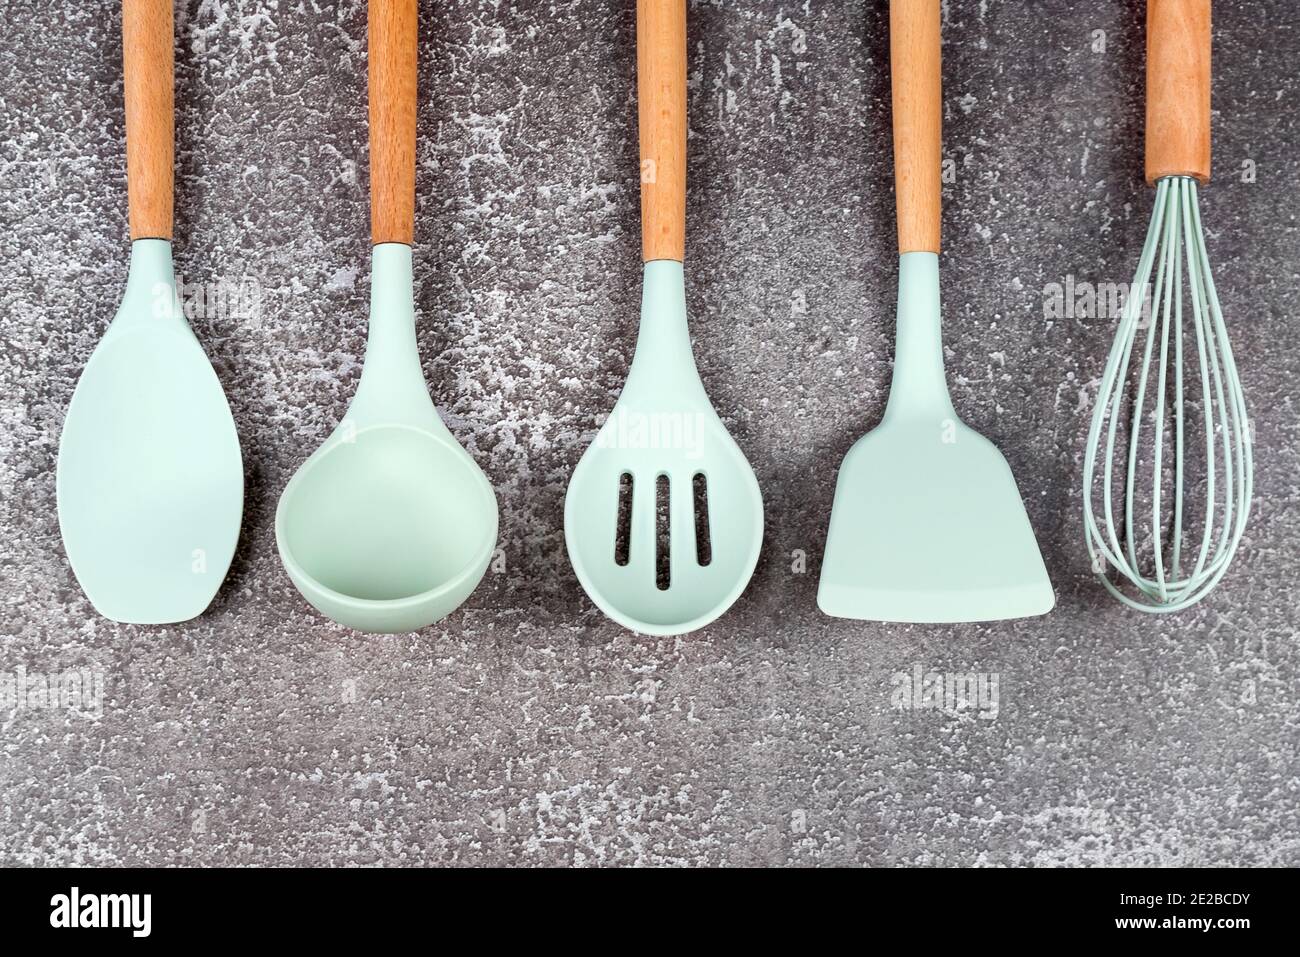 https://c8.alamy.com/comp/2E2BCDY/kitchen-utensils-home-kitchen-tools-mint-rubber-accessories-on-dark-background-restaurant-cooking-culinary-kitchen-theme-silicone-spatulas-and-2E2BCDY.jpg